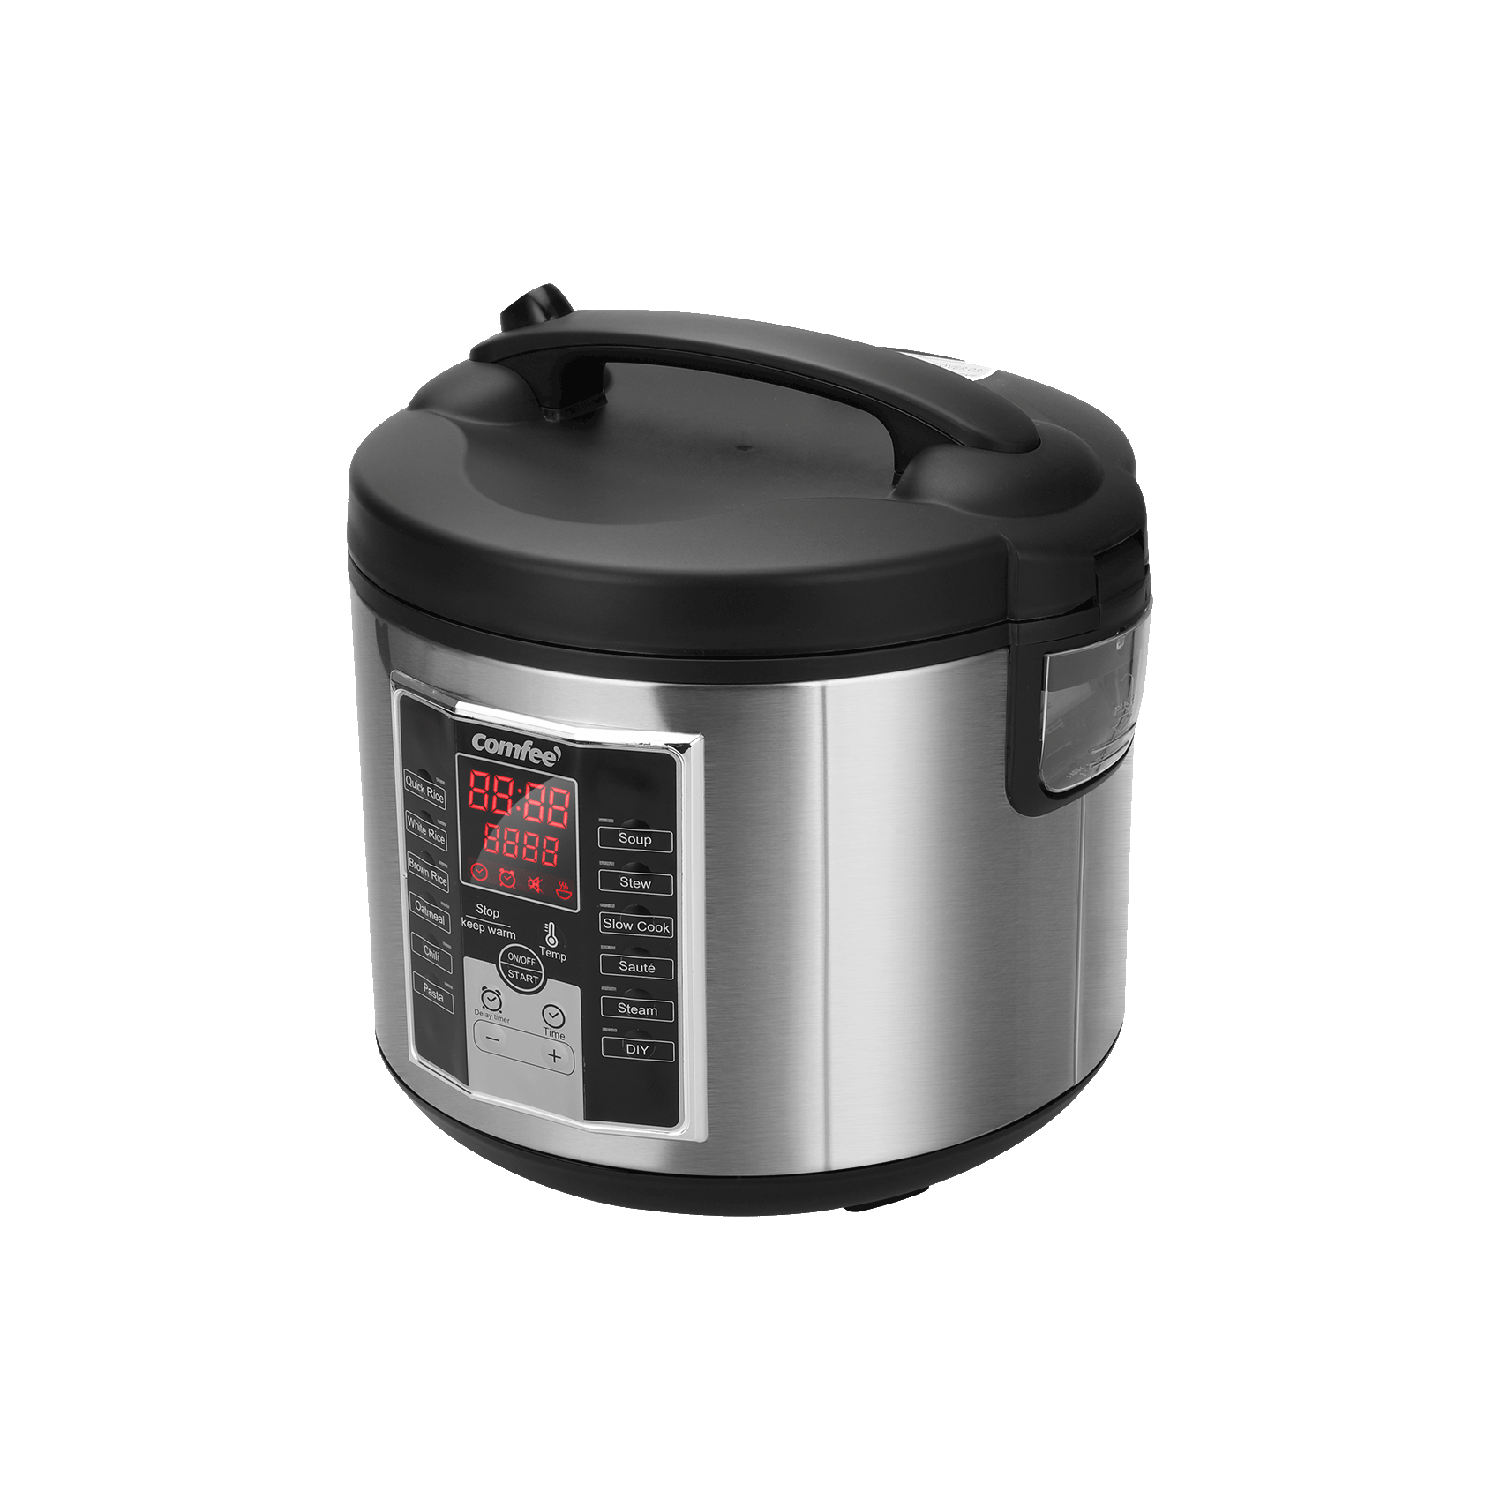 COMFEE' MB-M25 Rice 5L 20 Cups 6-in-1 Electric Slow Cooker for sale online